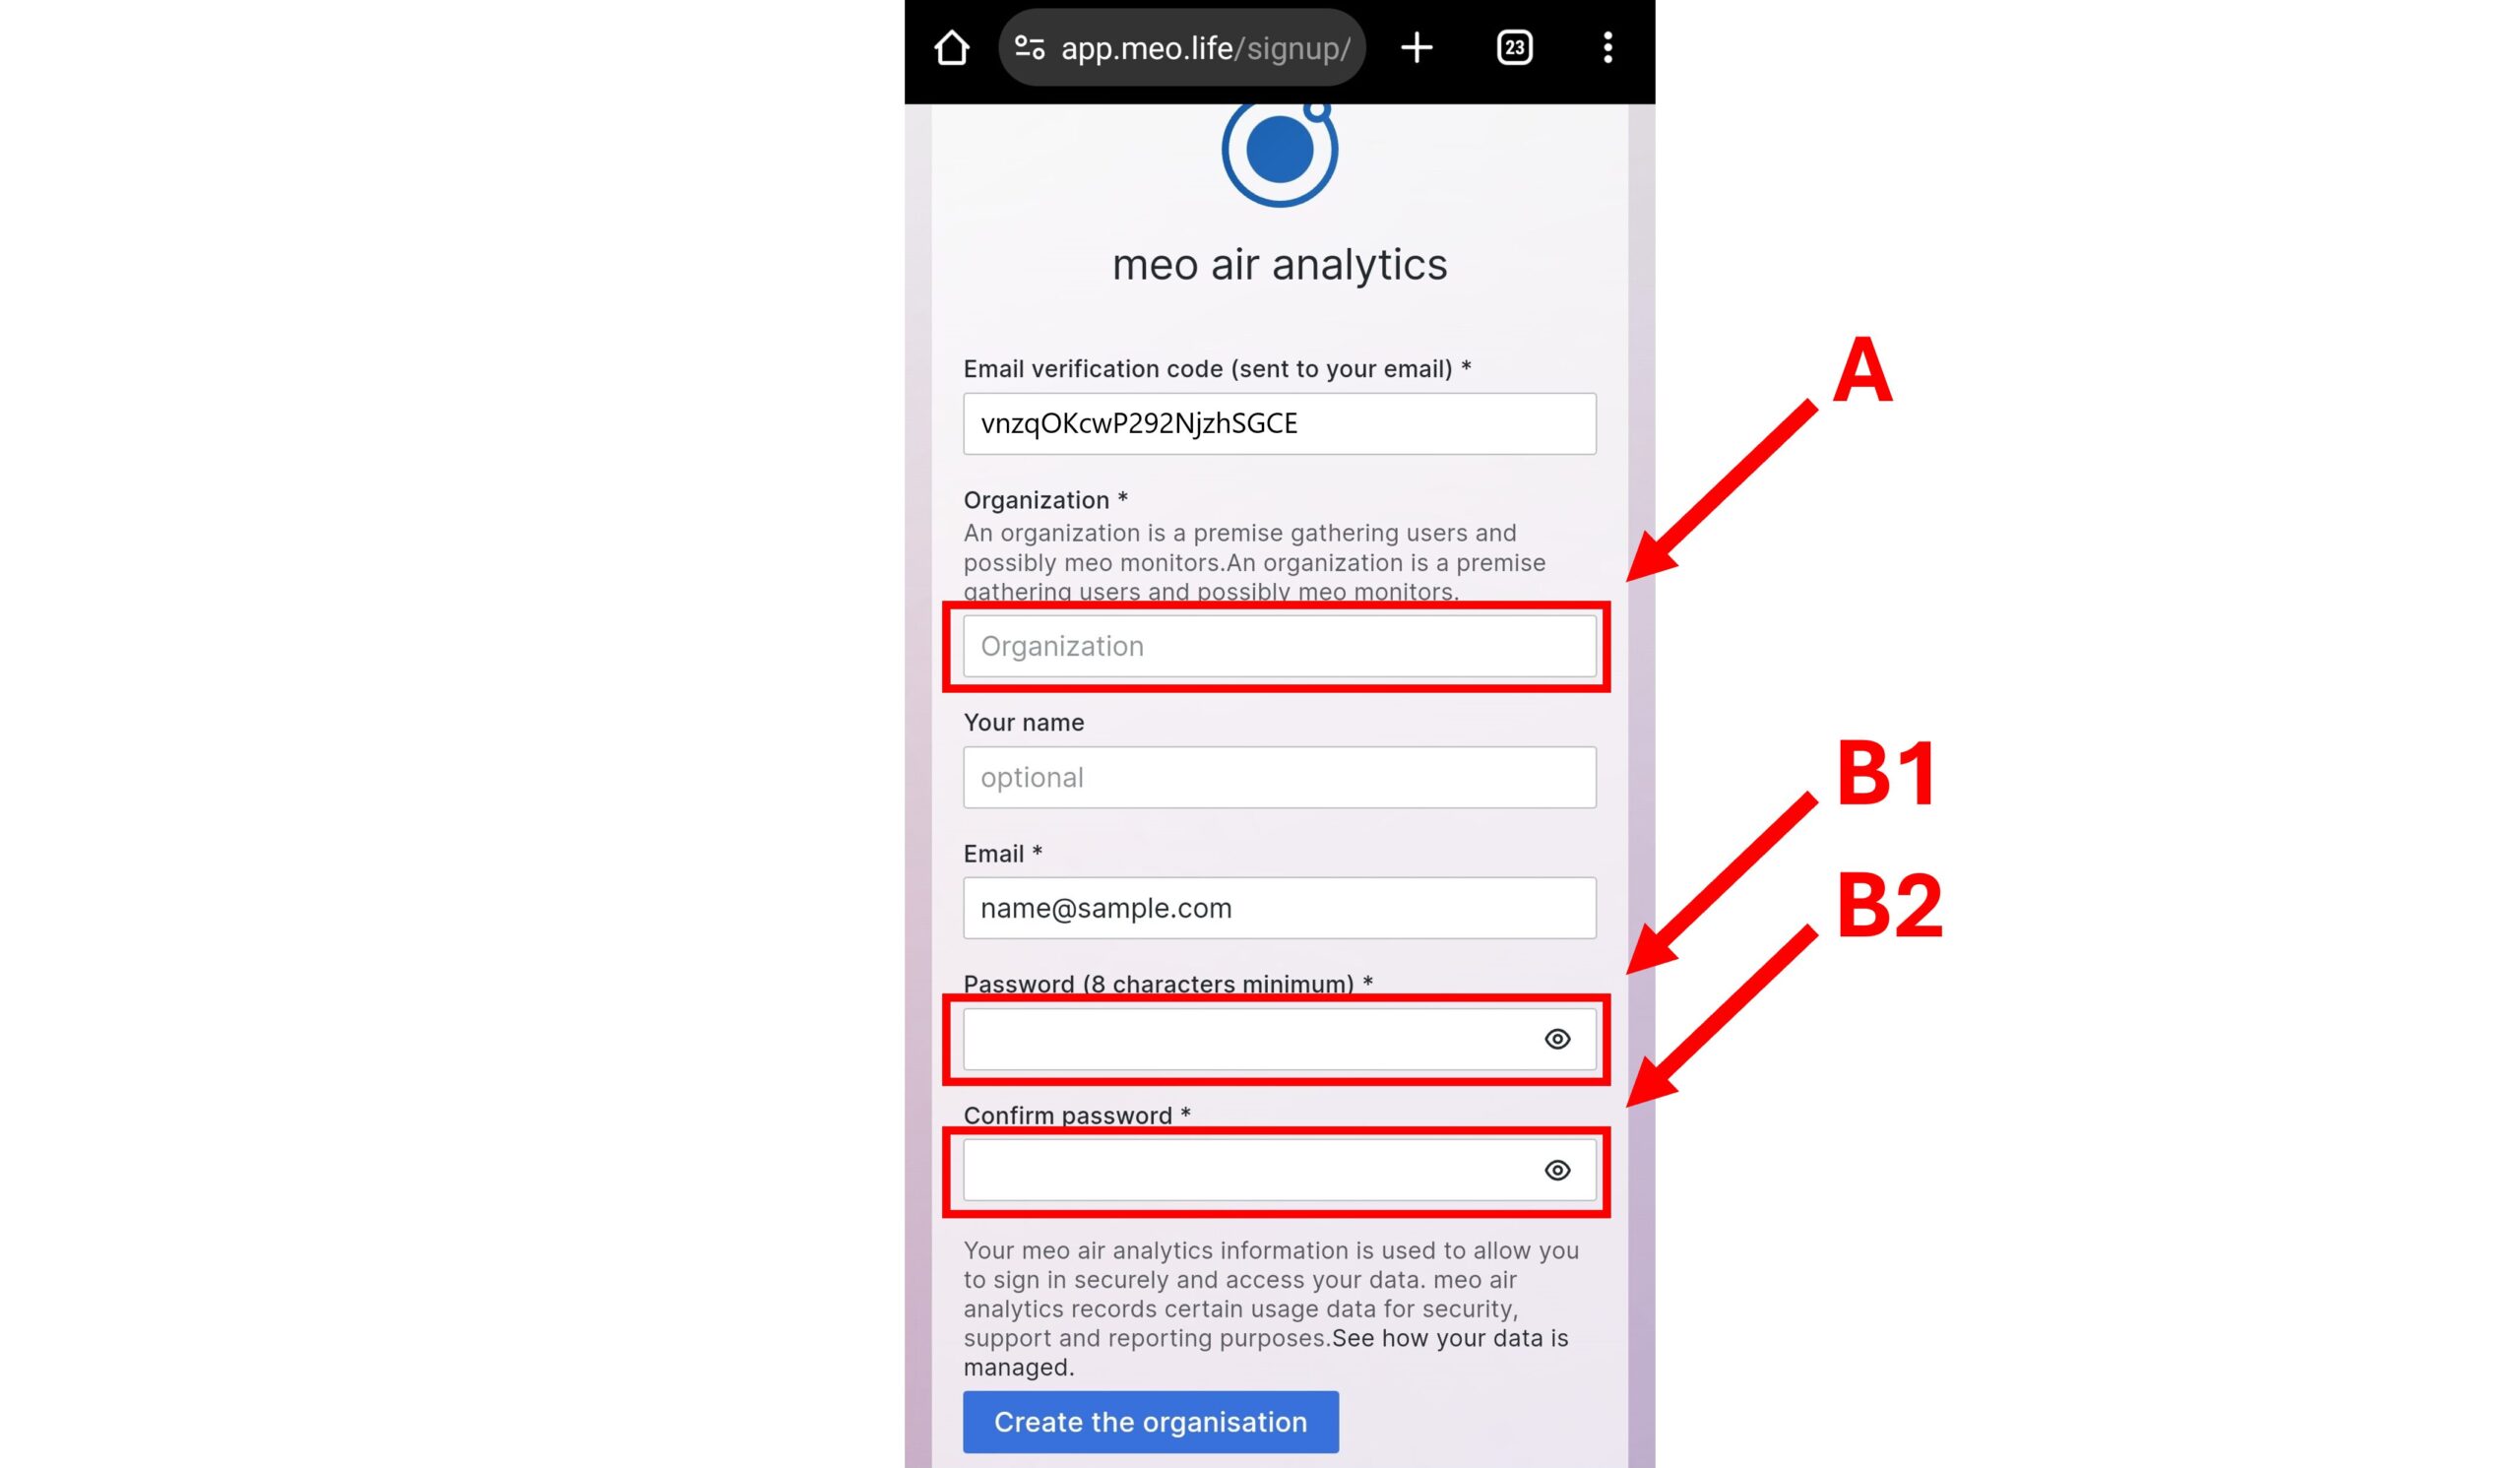 5. Fill in organisation and user credentials (A, B1, and B2)